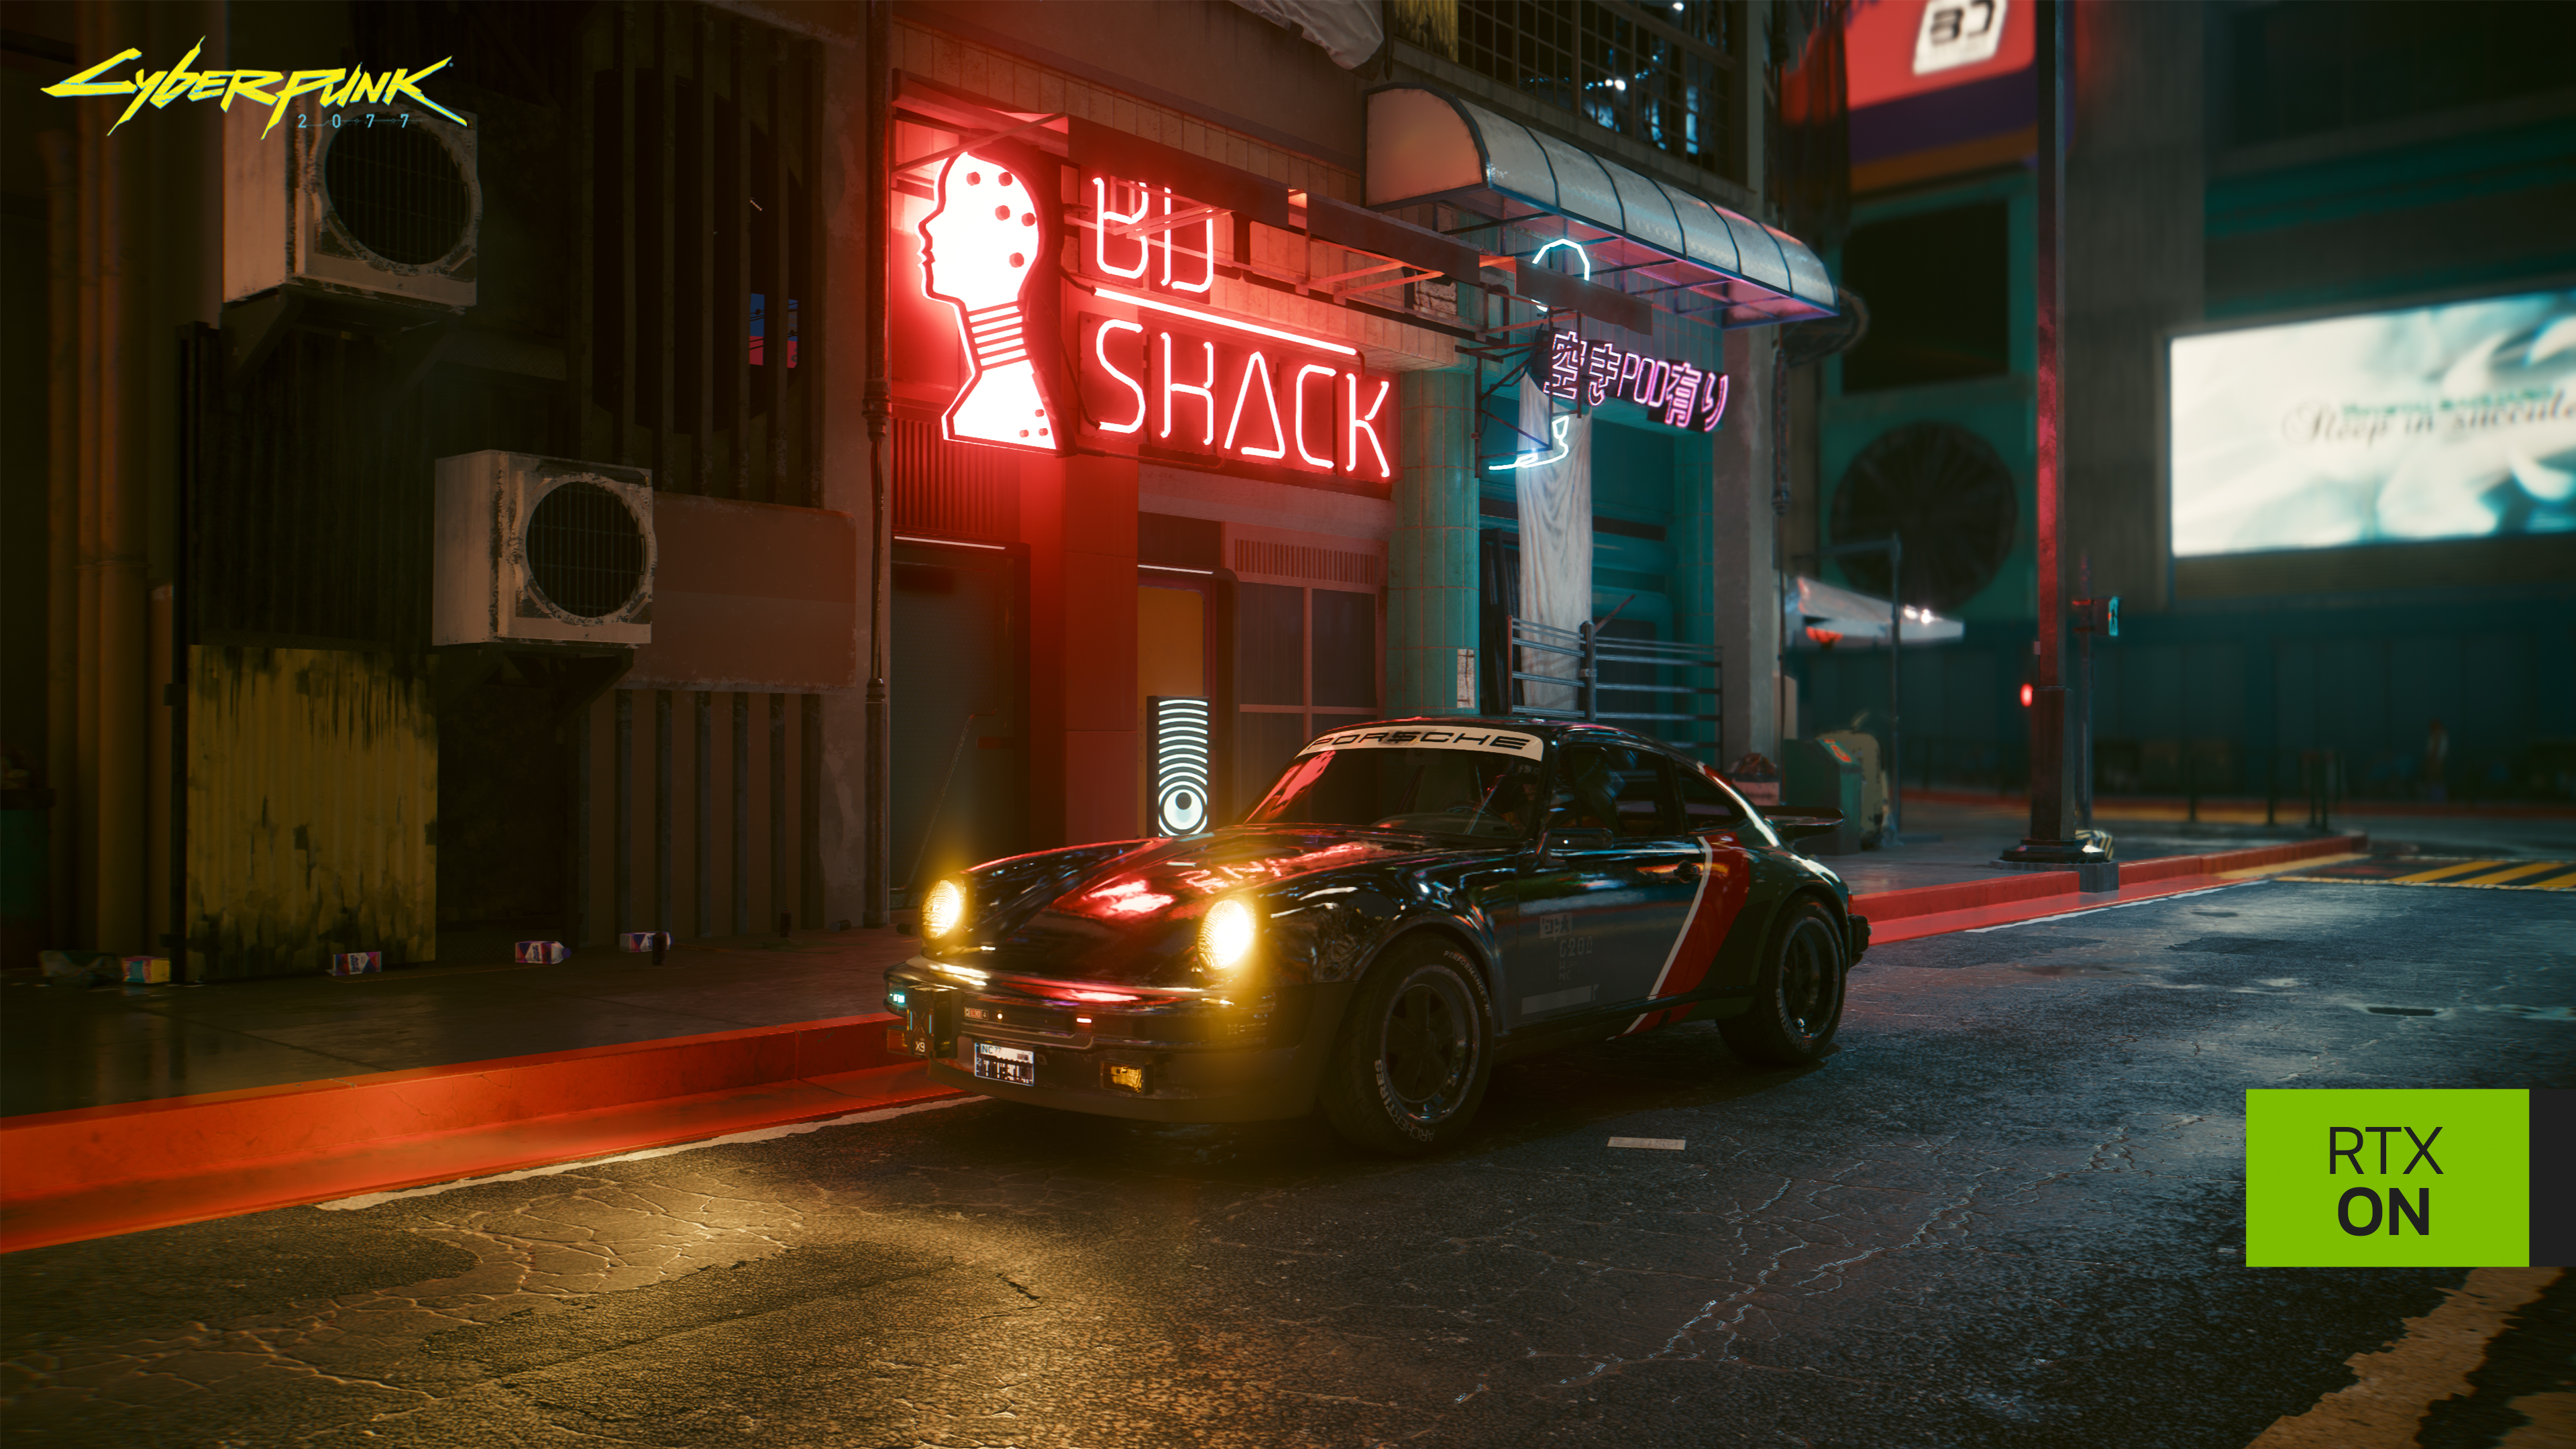 Cyberpunk 2077 RT Overdrive: a closer look at the path tracing upgrade